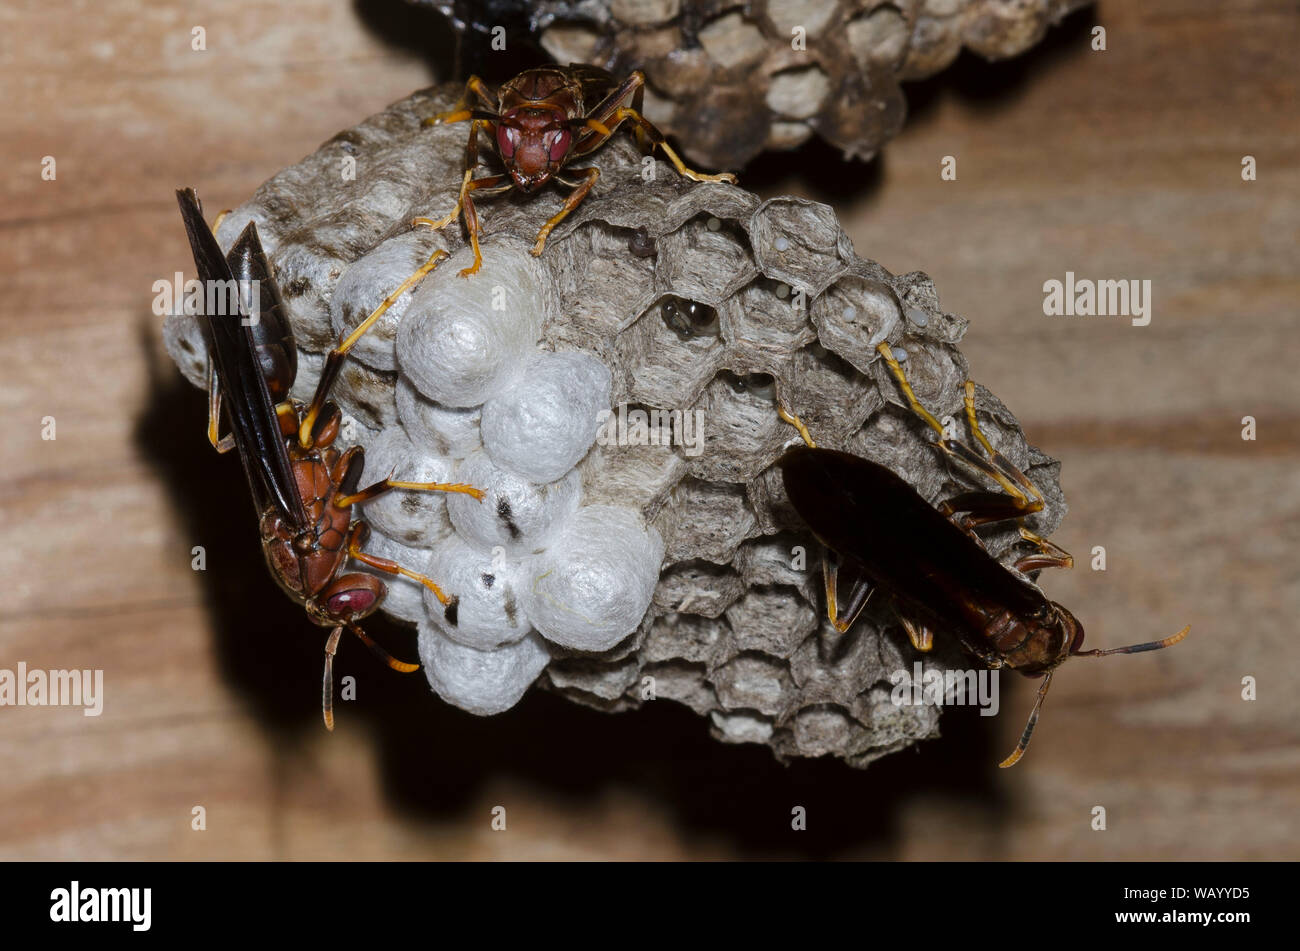 Paper Wasps, Polistes annularis, on nest Stock Photo